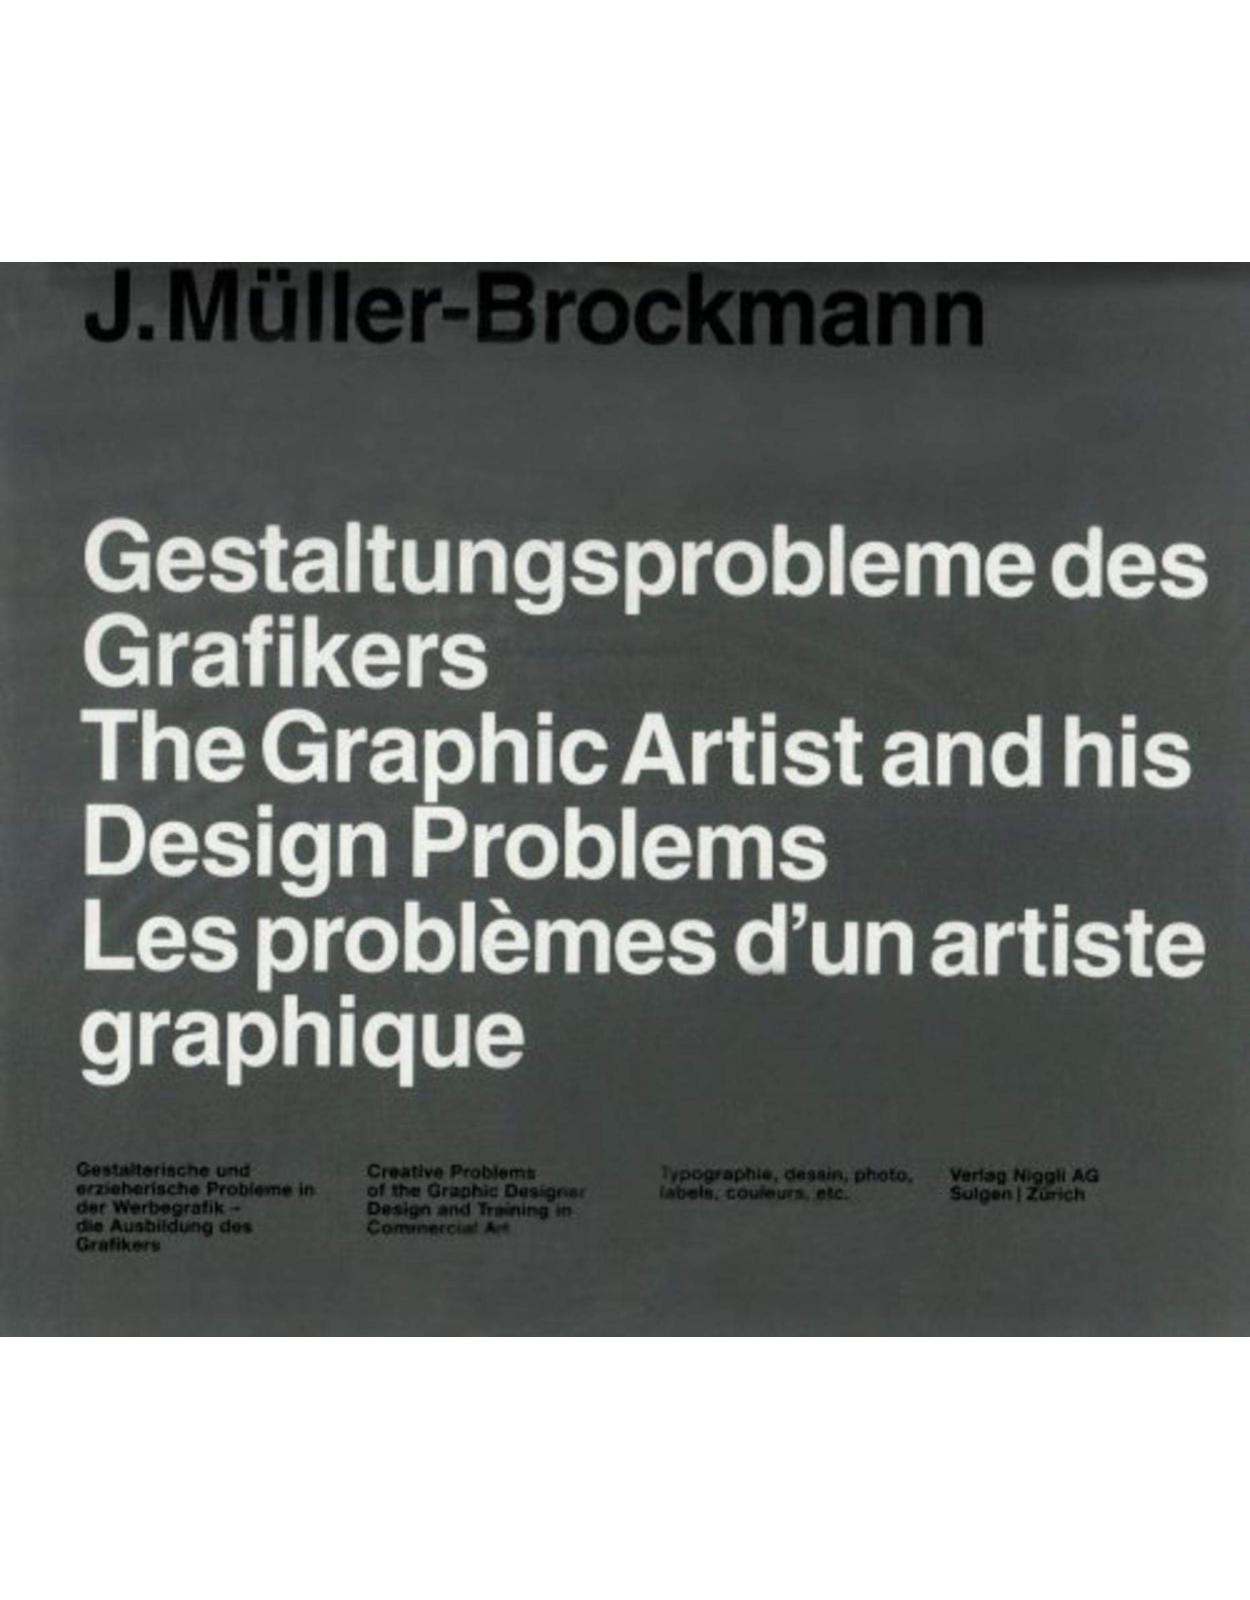 Creative Problems of The Graphic Designers Design and Training in Commercial Art